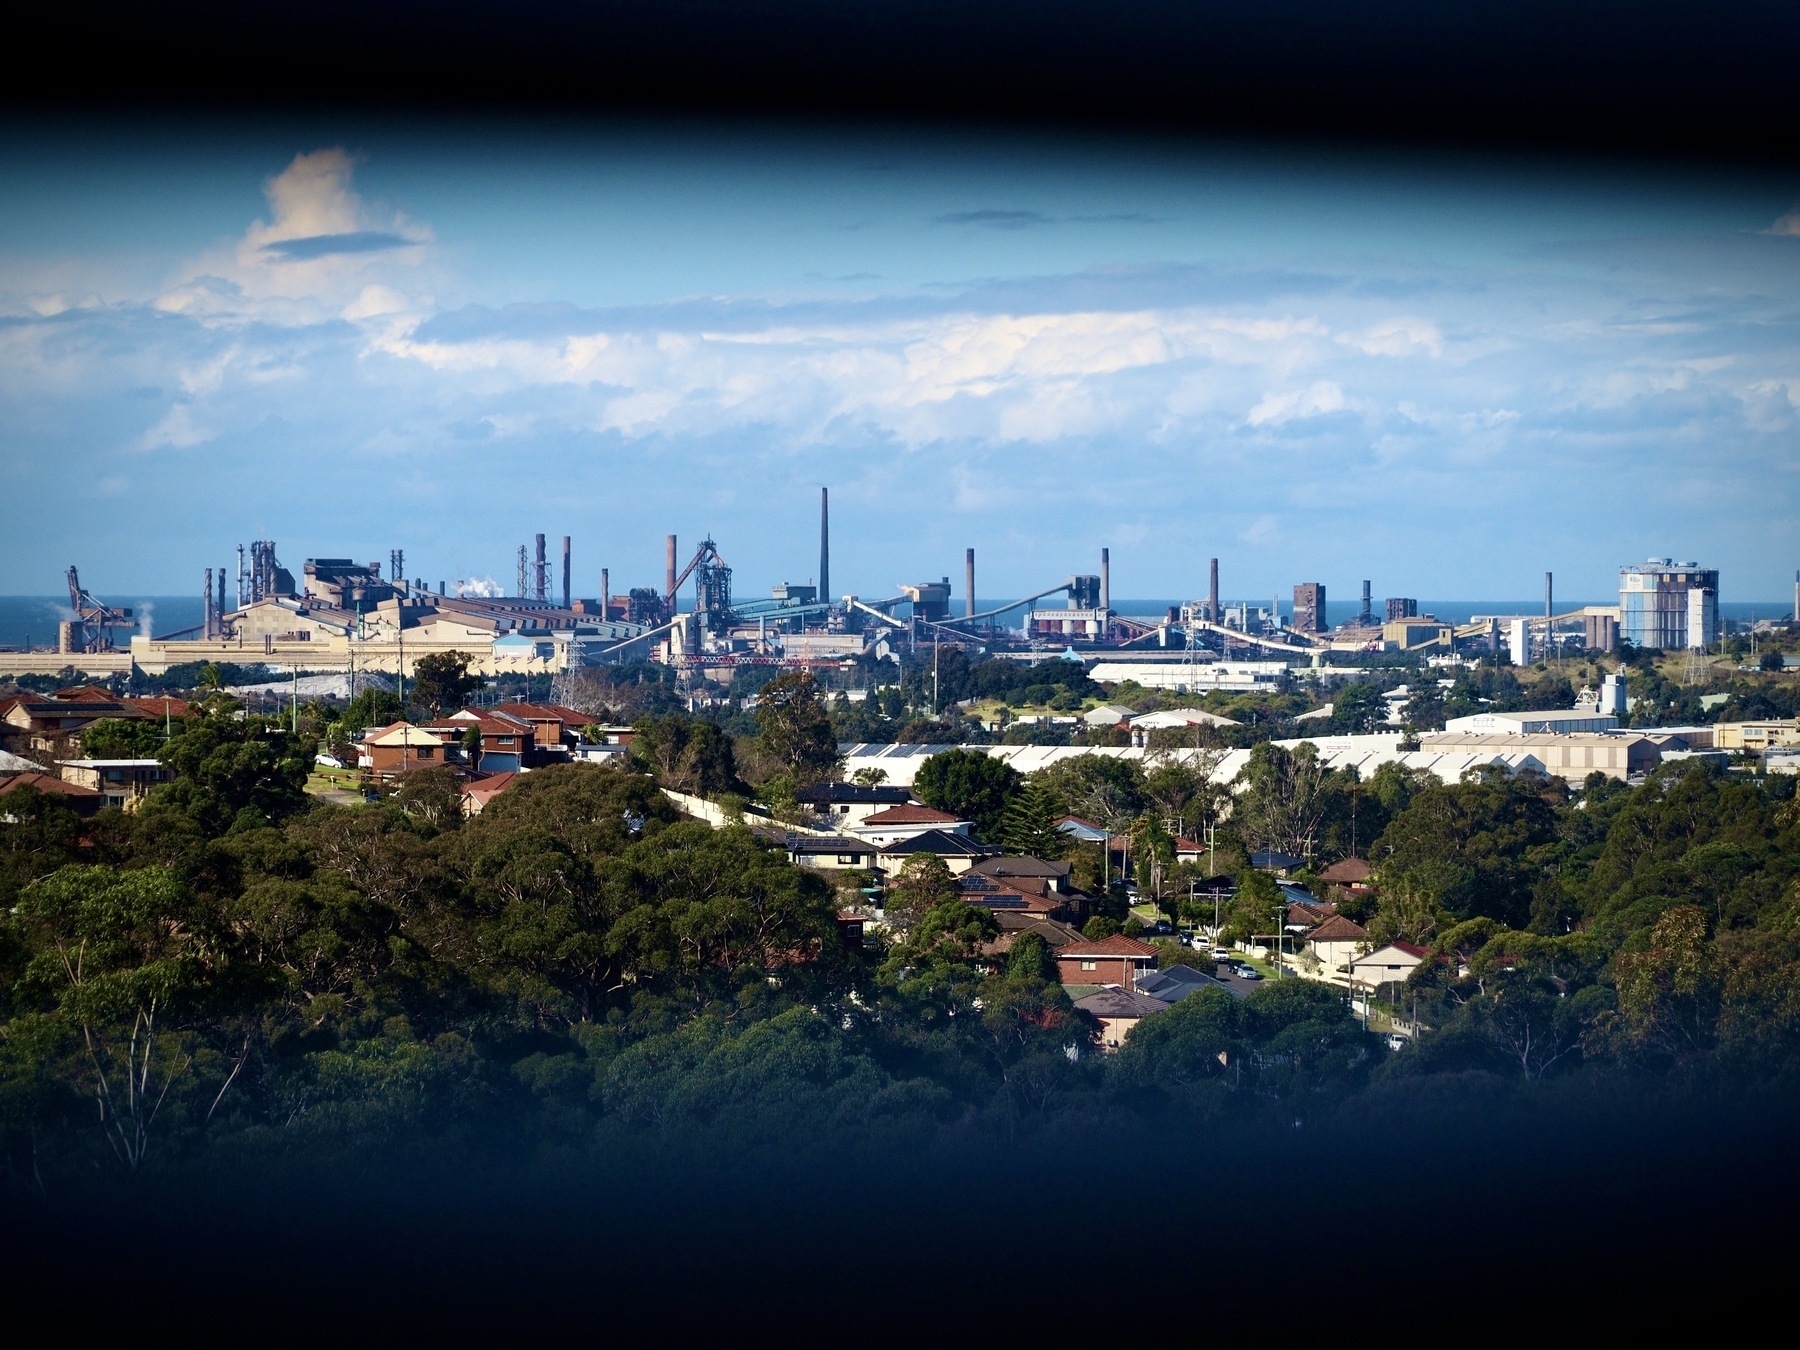 Looking at the Port Kembla Steelworks and surrounding leafy suburbs through window shutters, with the Tasman Sea in the very far distance